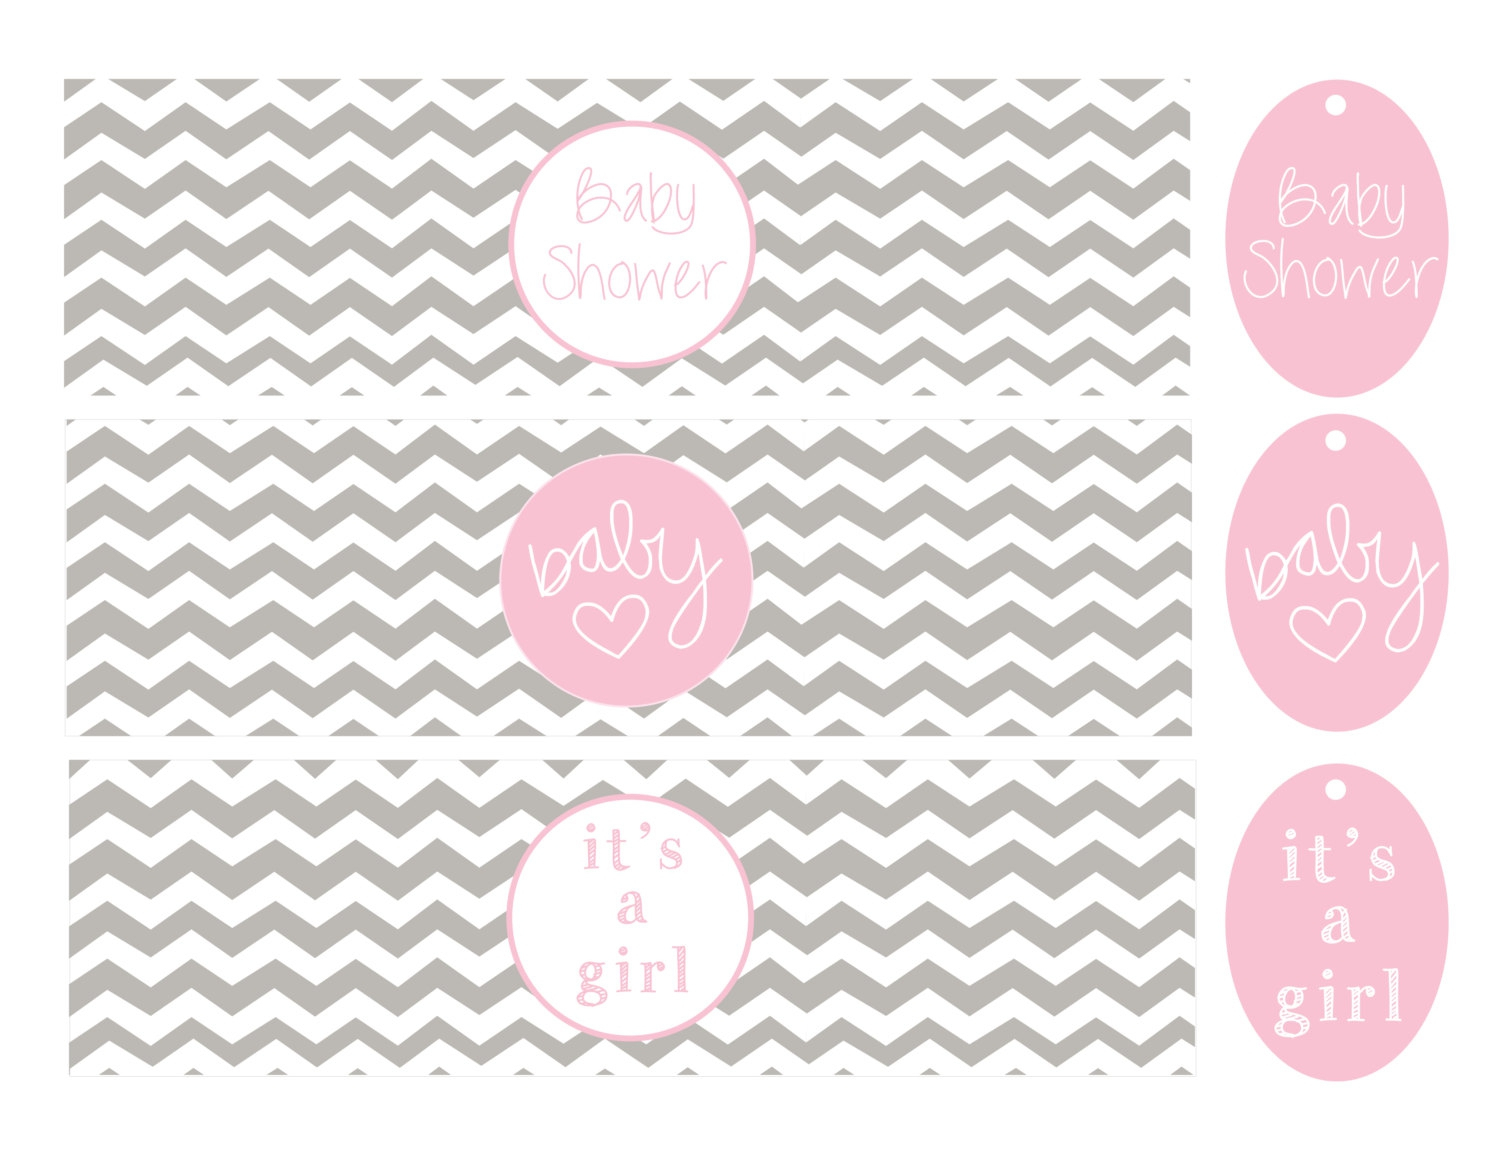 Free Printable Water Bottle Labels For Baby Shower - Baby Shower Ideas - Free Printable Baby Shower Labels For Bottled Water